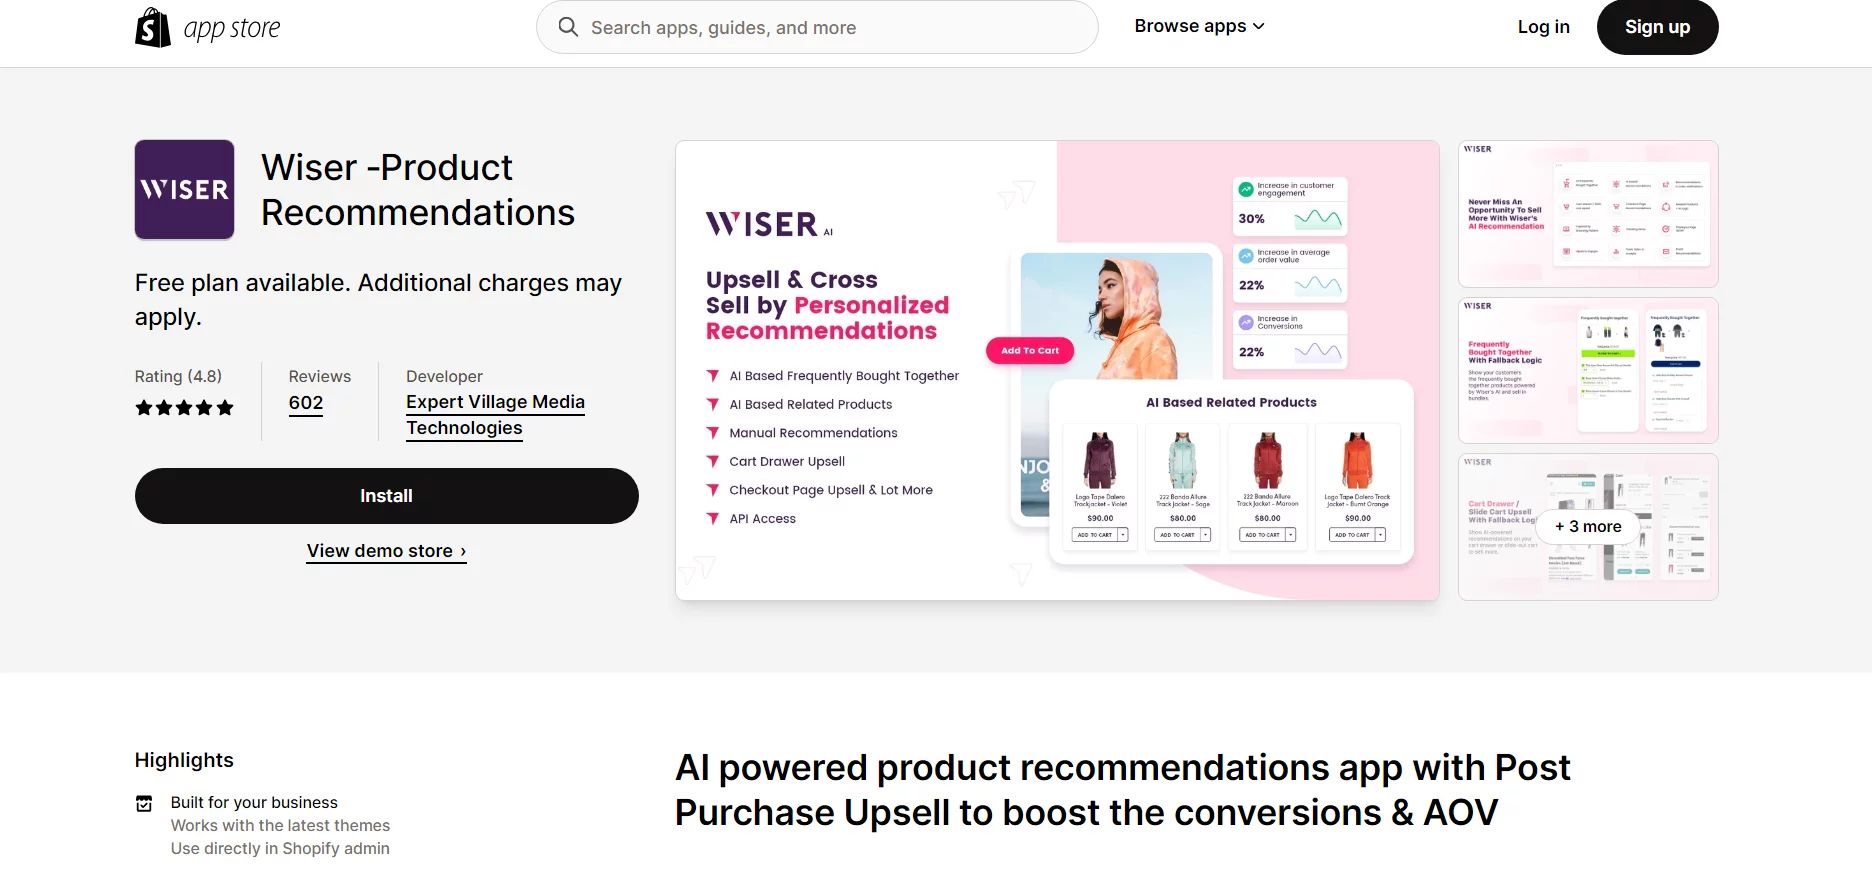 Wiser ‑Product Recommendations